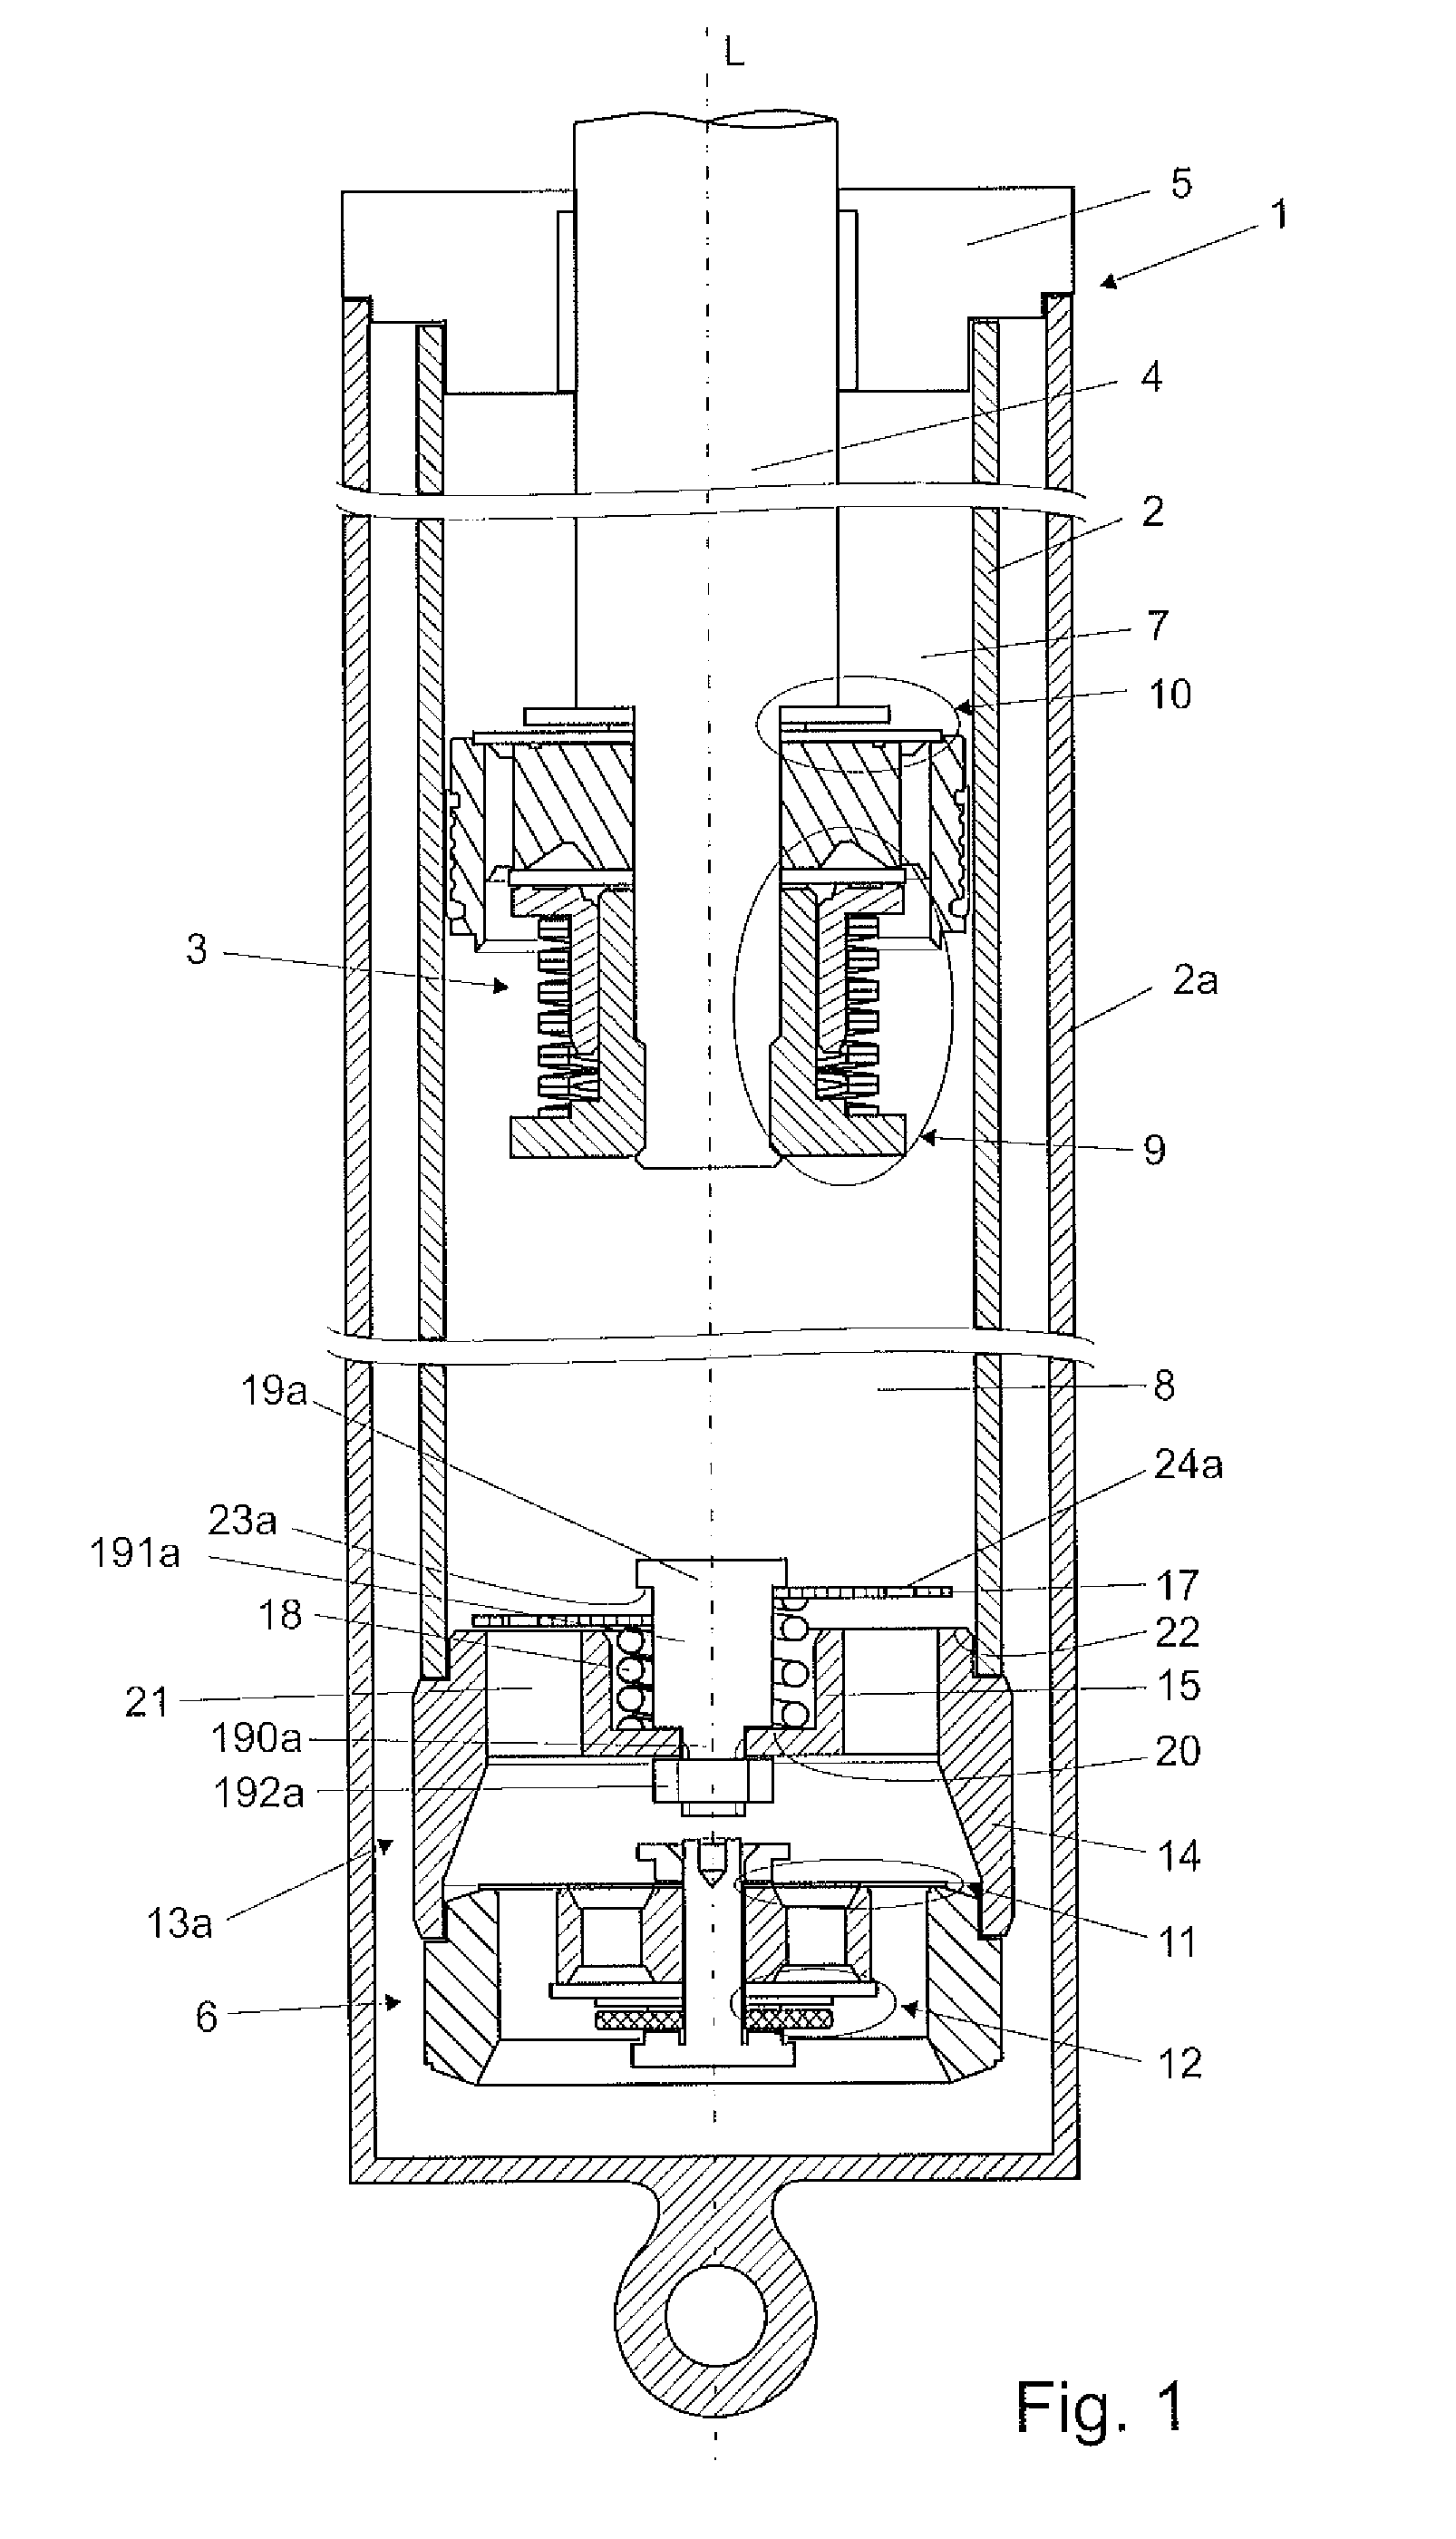 Hydraulic damper with compensation chamber